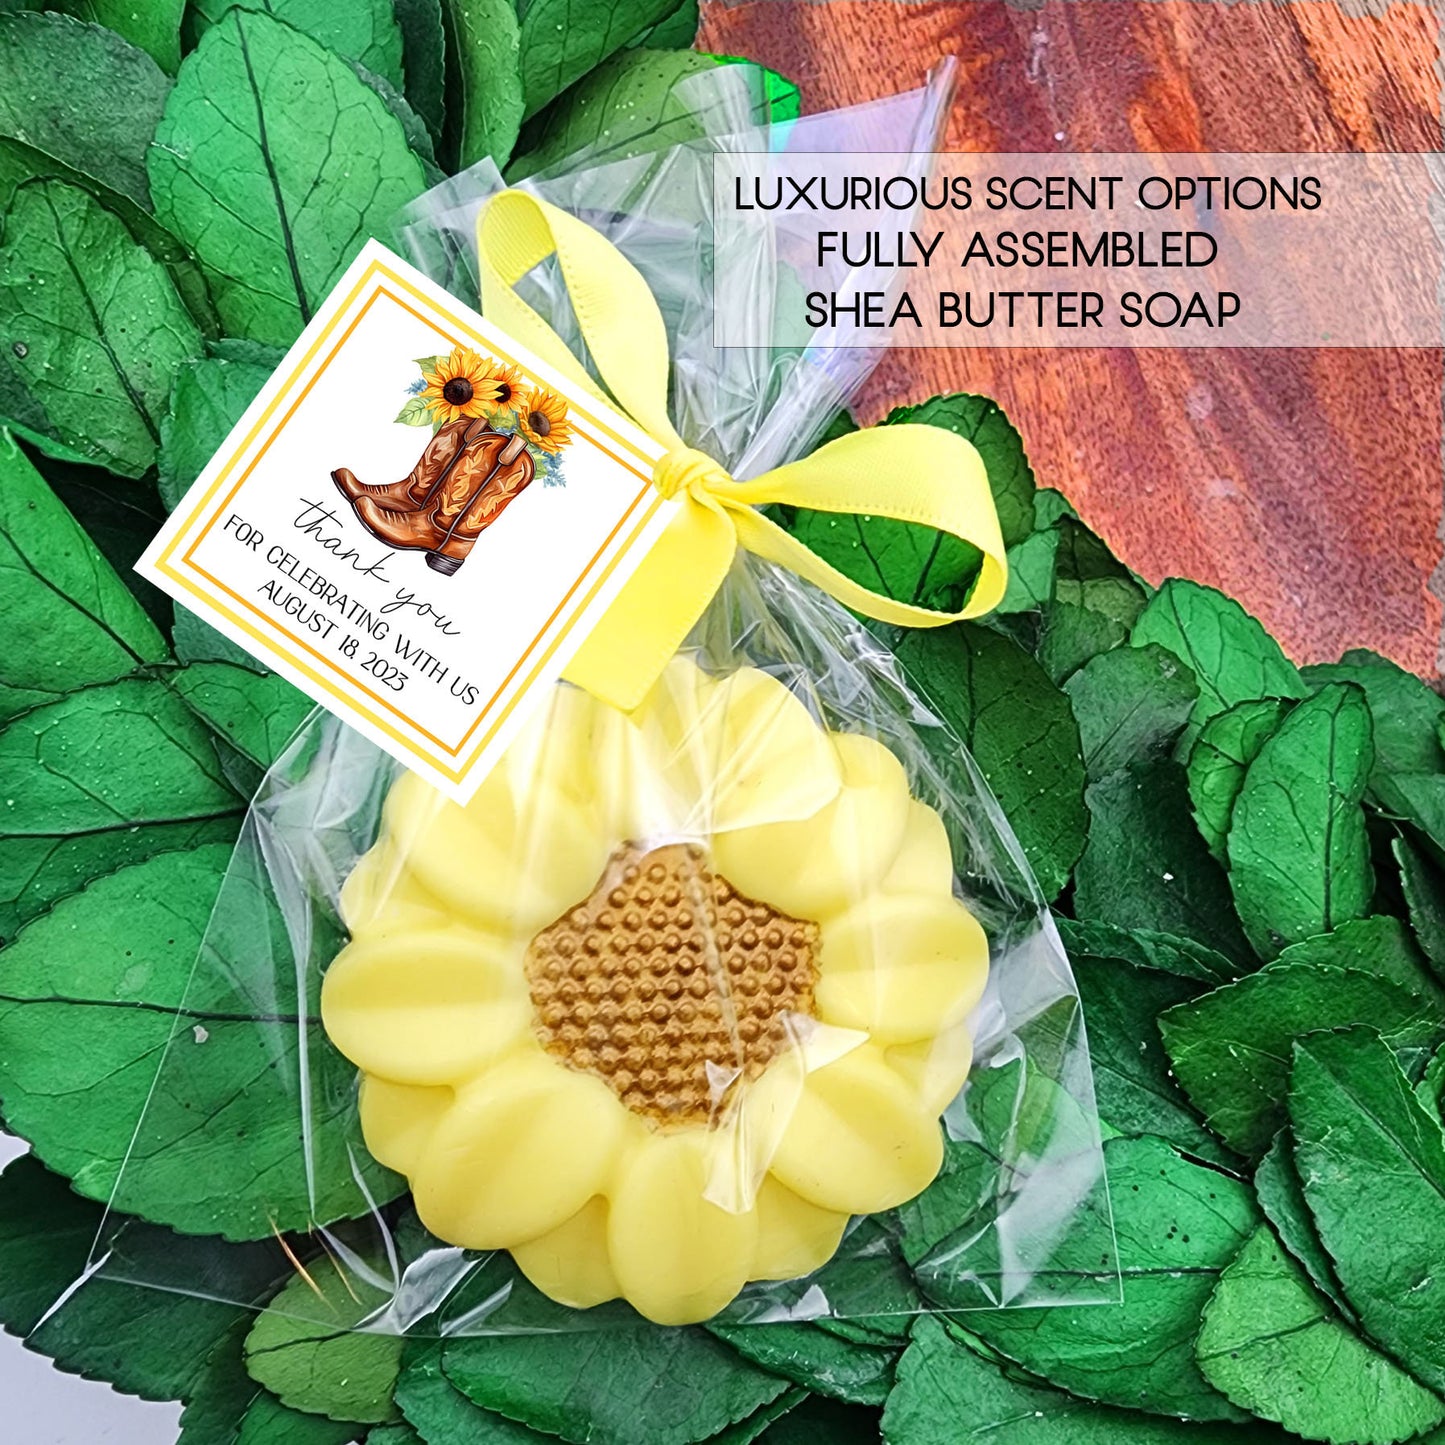 Sunflower boots bridal shower favors - Country western favors - Country western bridal shower favors -boots and bubbly